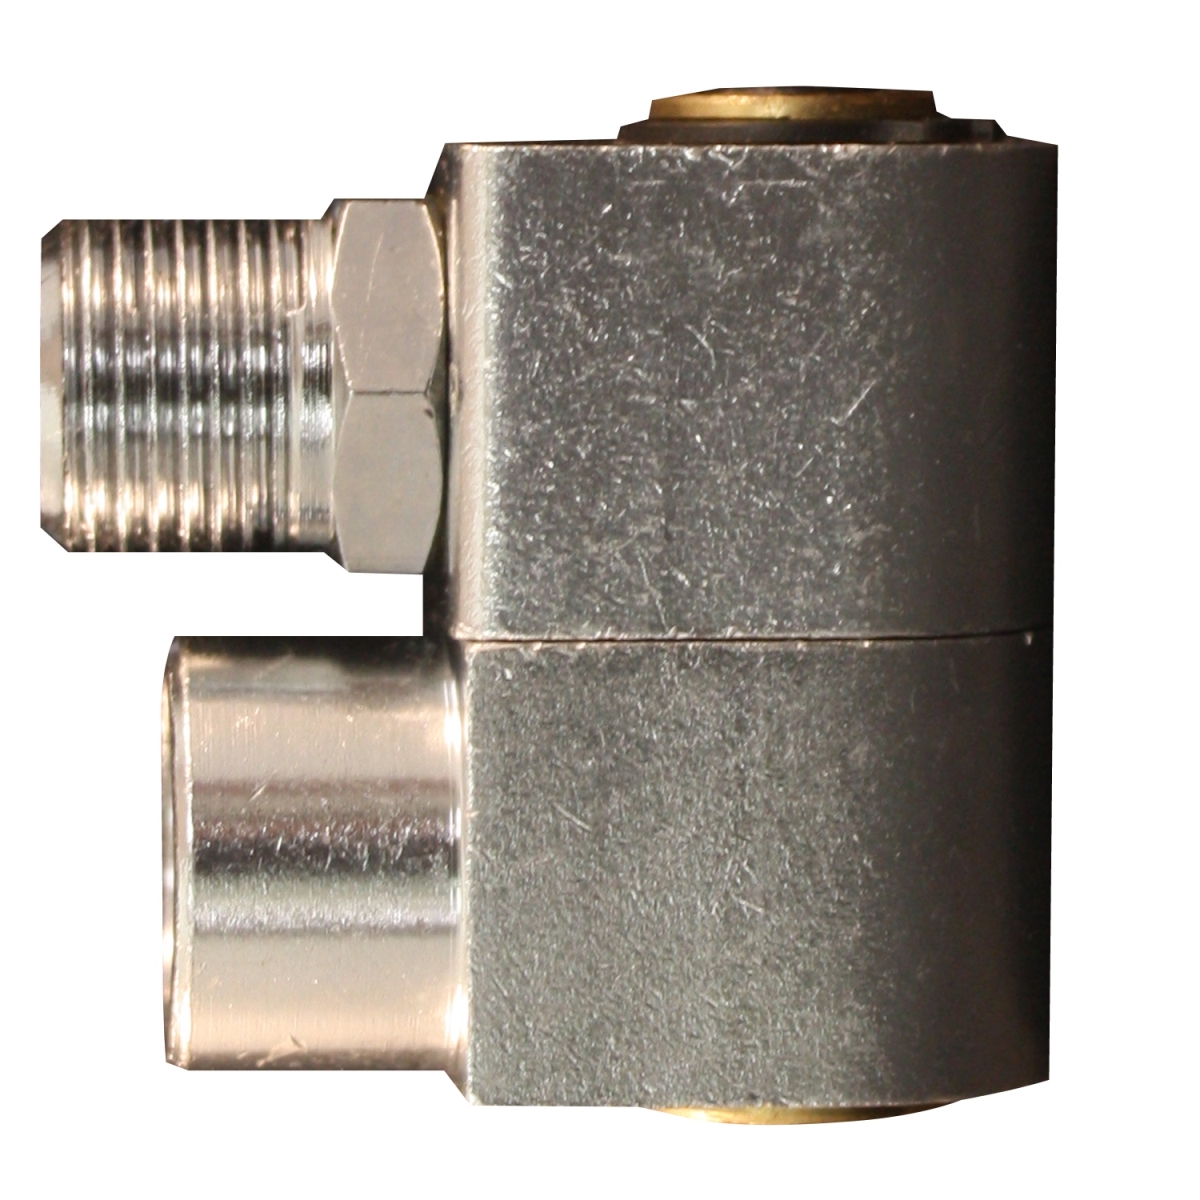 0.37 In. Npt Swivel Hose Fitting Connector